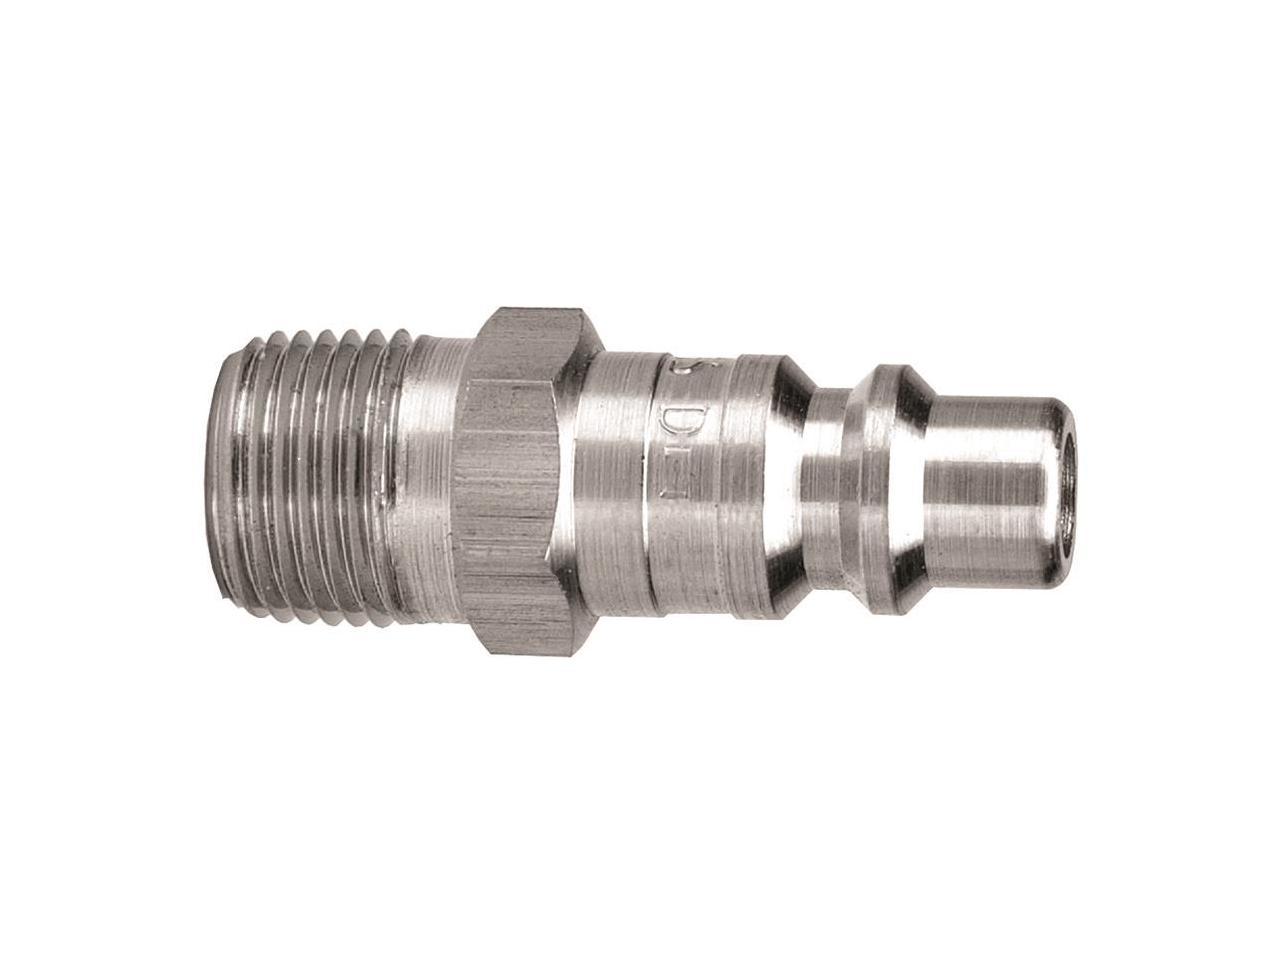 Air Line Hose Connector Fitting Female Quick Release 3/8 inch BSP Female 2pk 